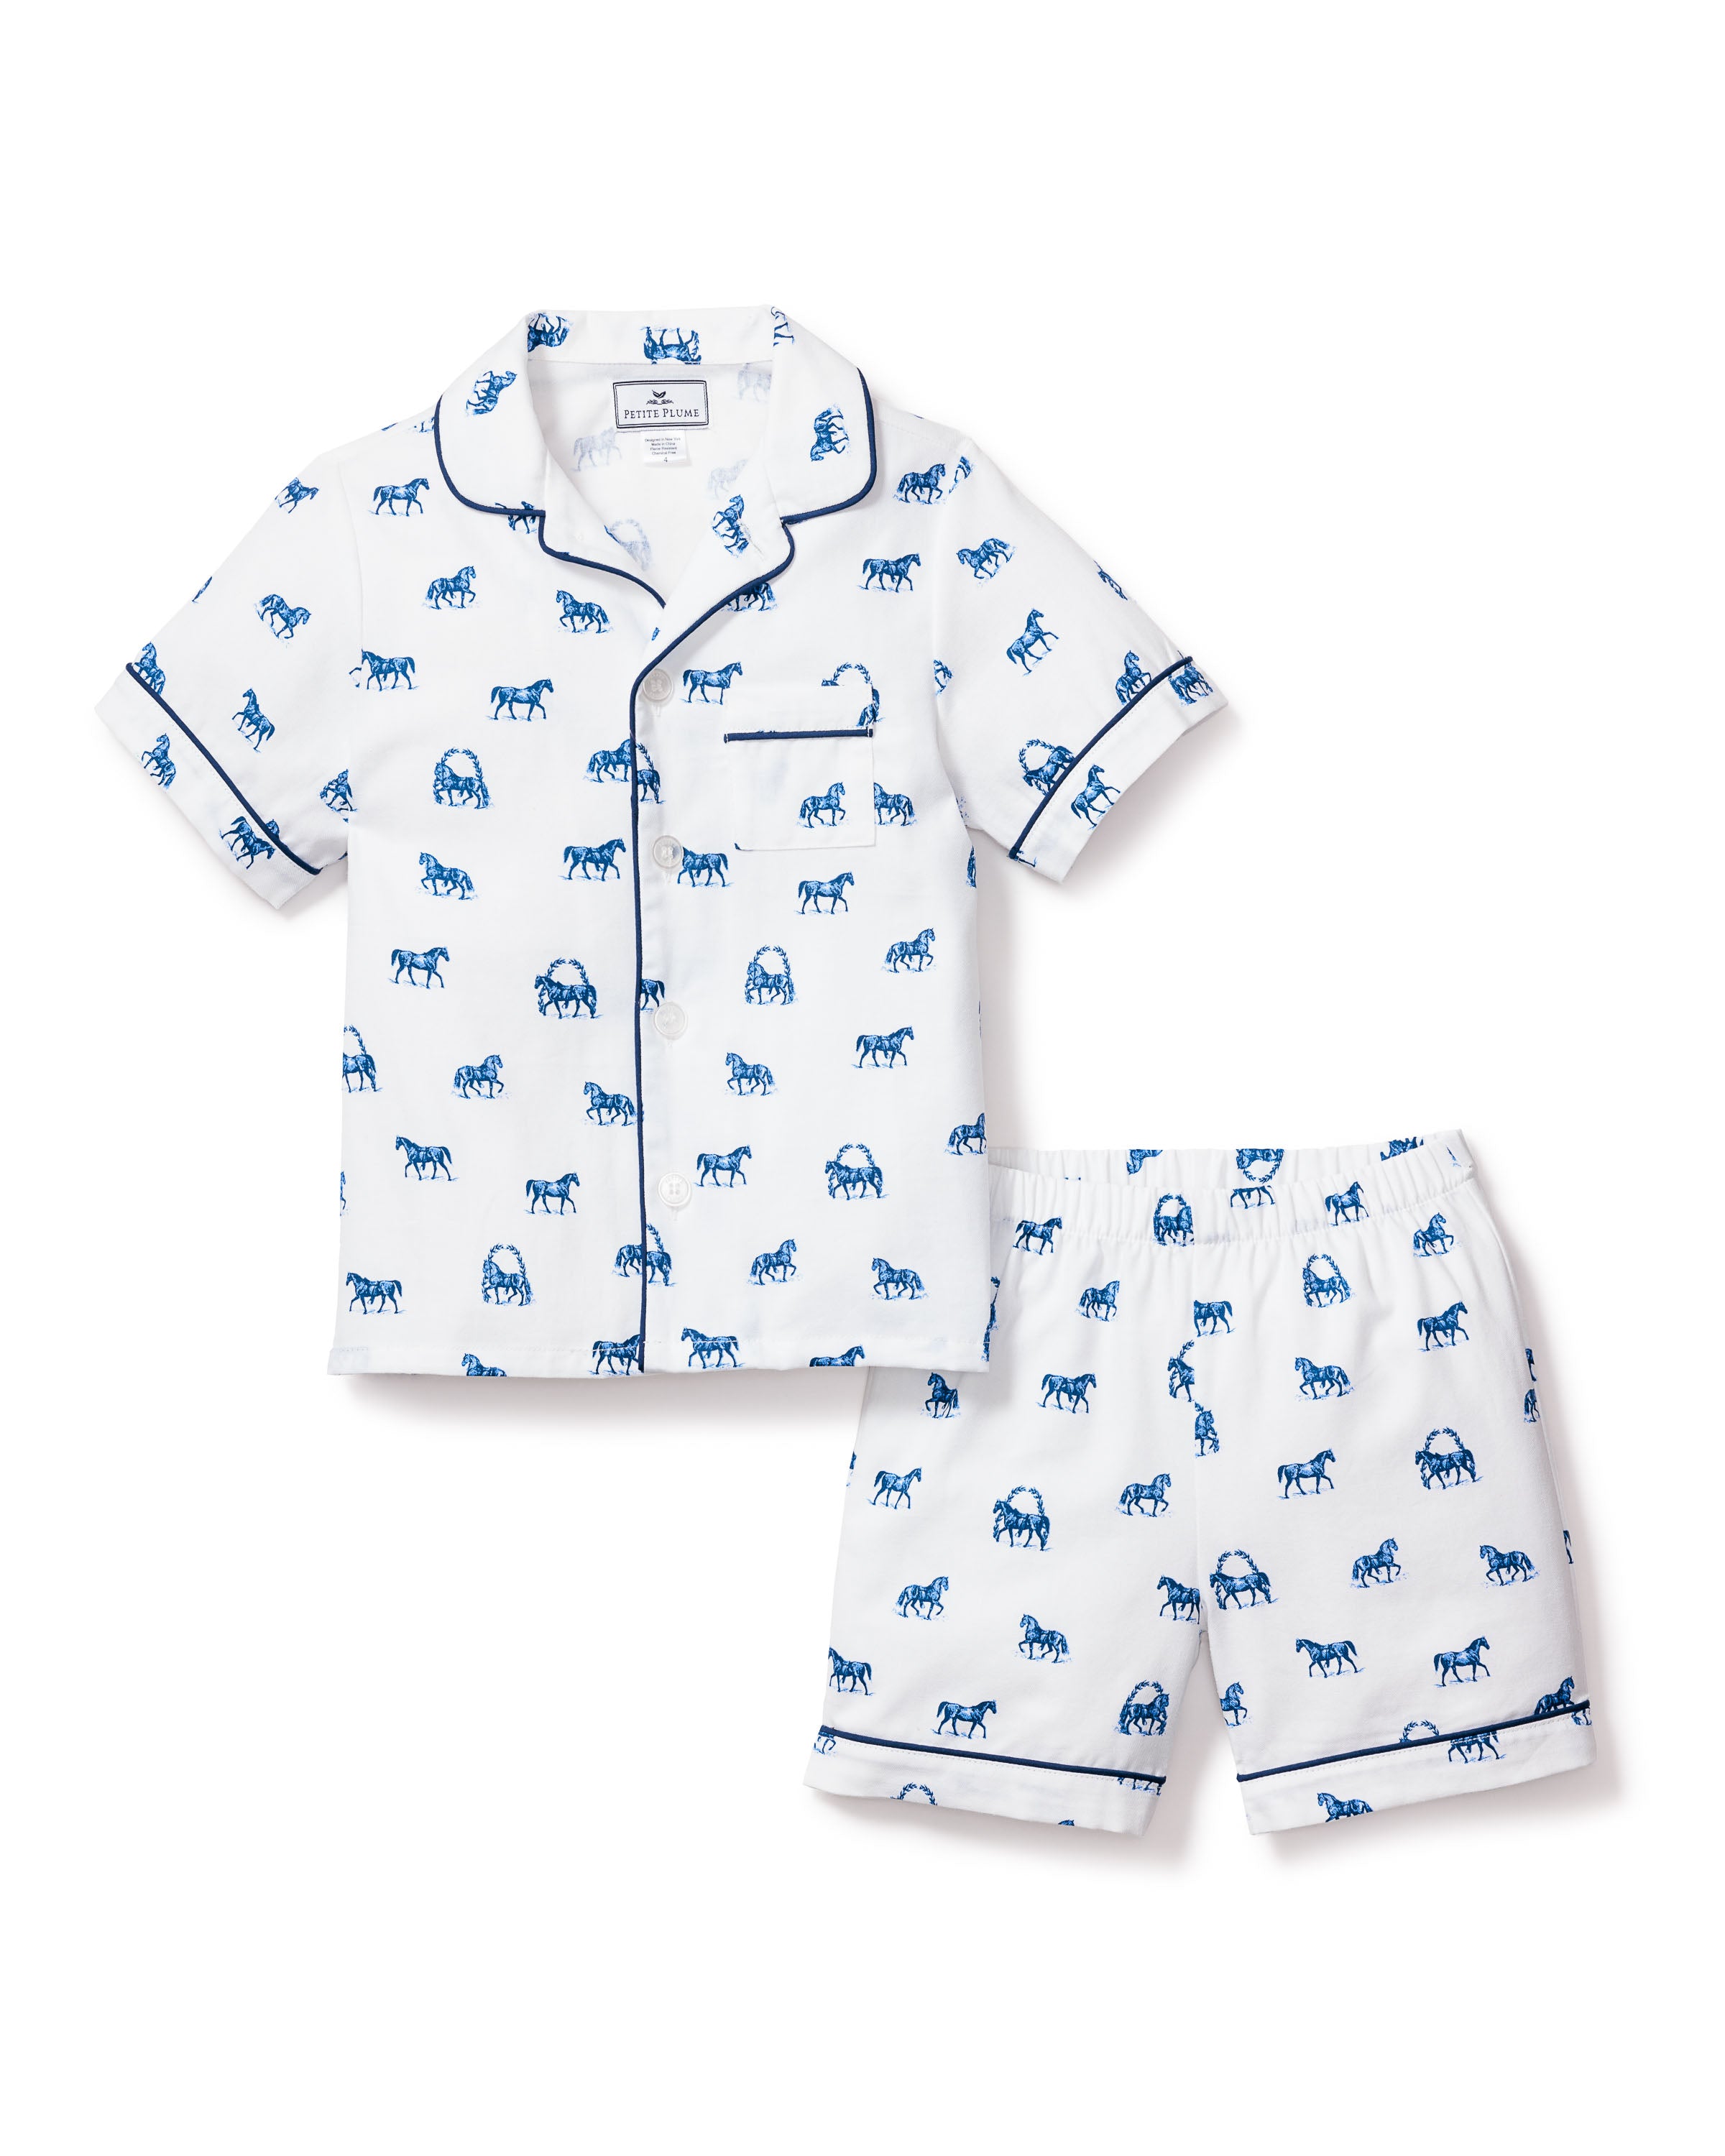 Kid's Twill Pajama Short Set in The Equestrian